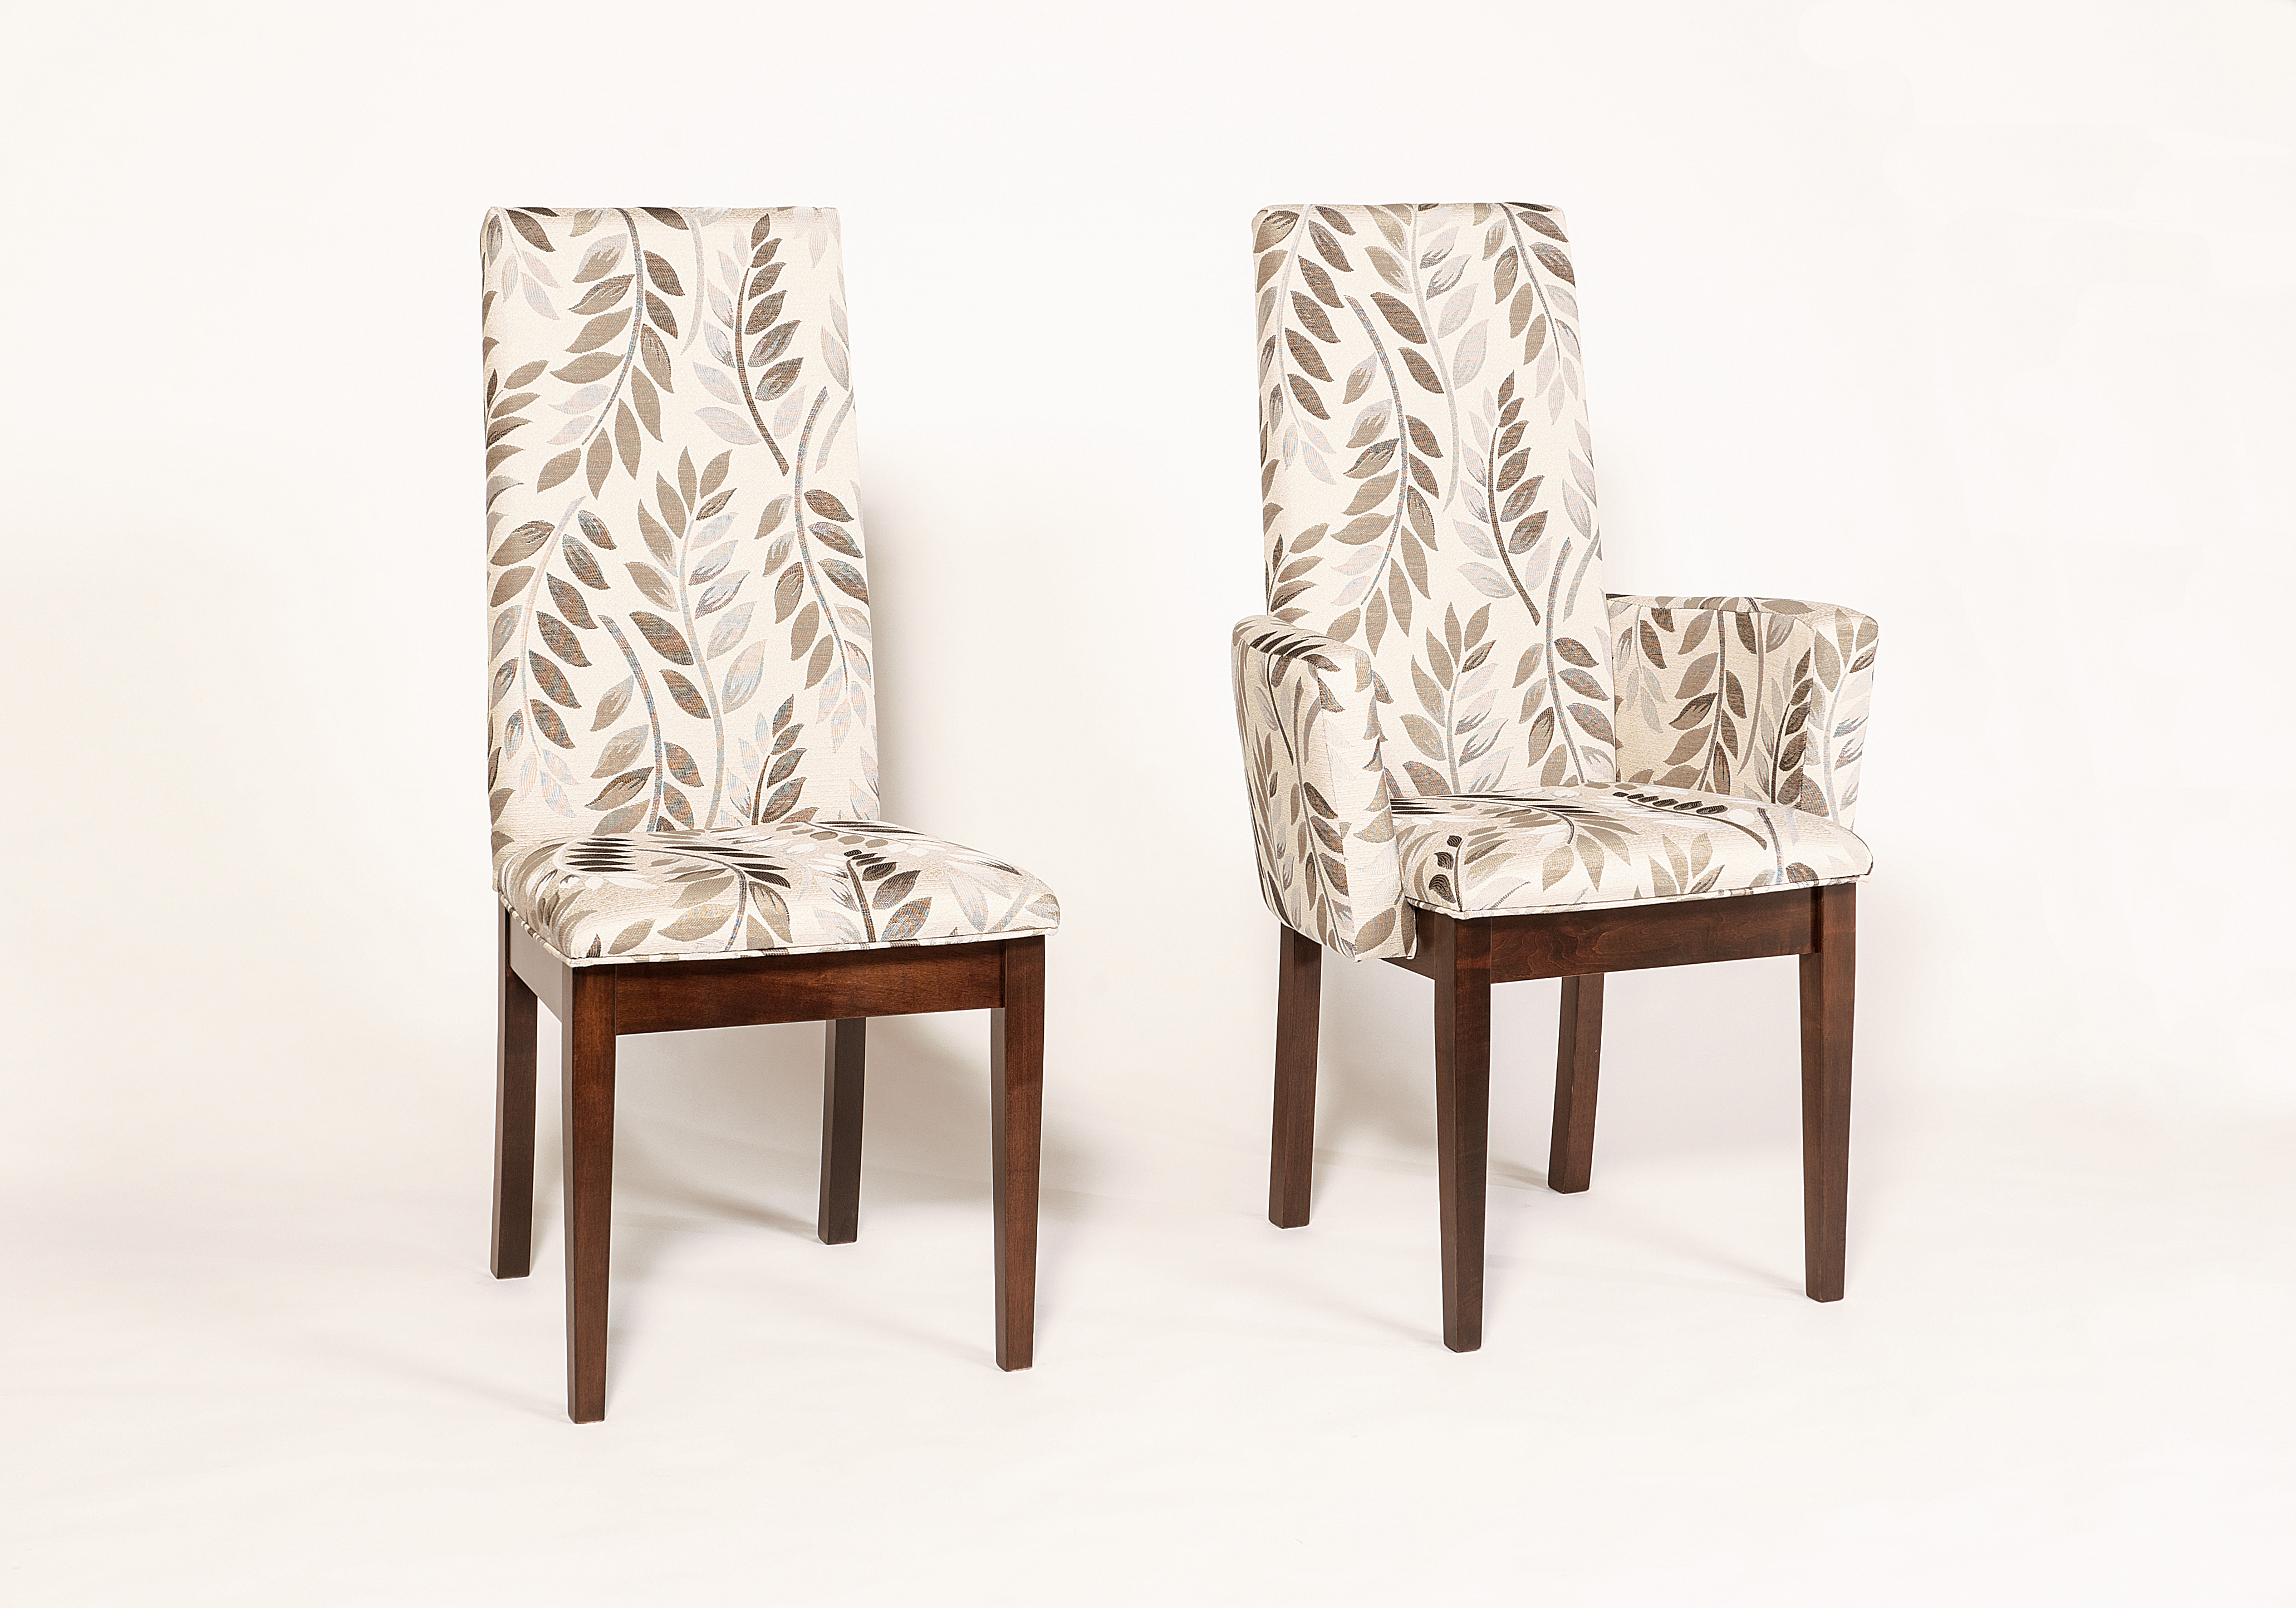 Upholstered Dining Room Chairs With Arms: A Wise Choice for Your ABode